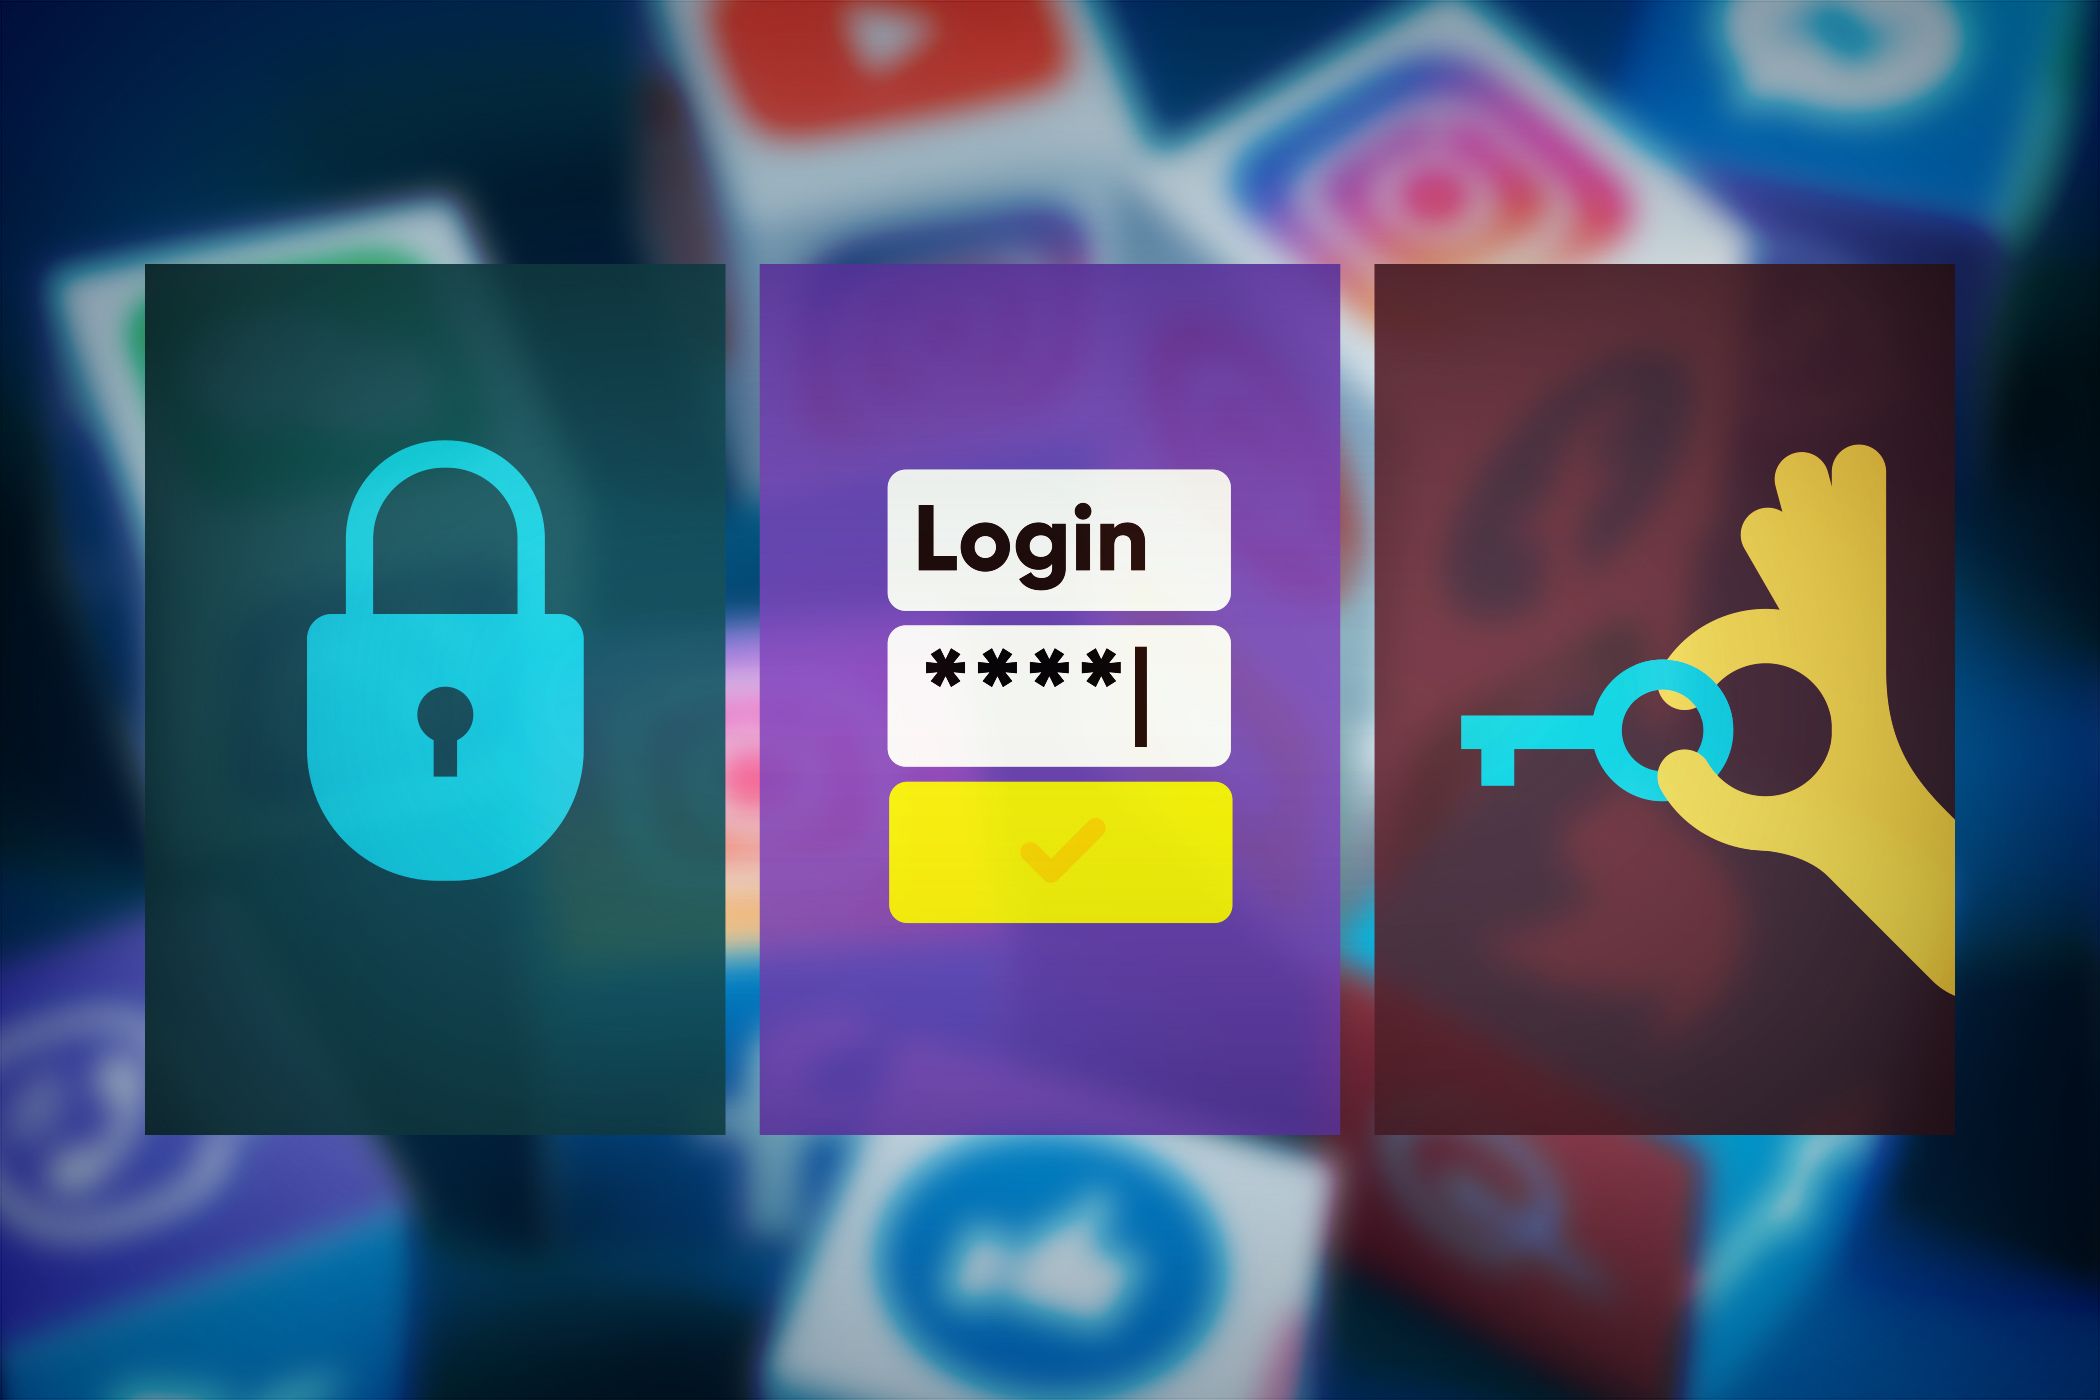 Icons of a padlock, login screen, and key, representing online security, authentication, and access control over a blurred background.